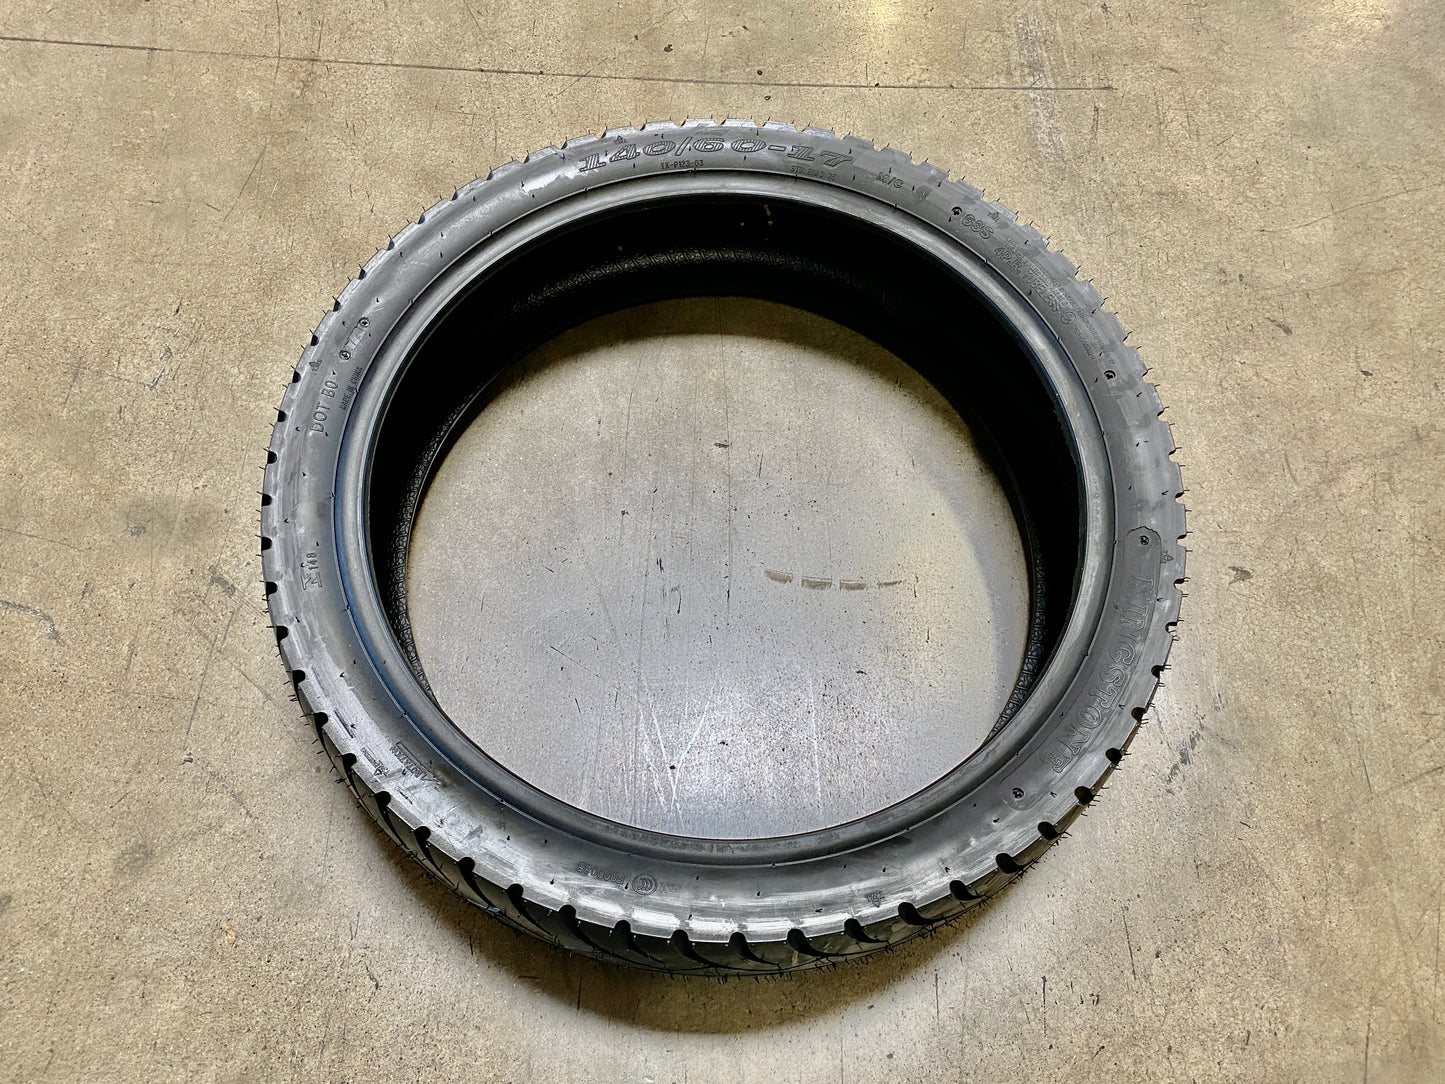 Back tire for sale 140x60-17. Motorcycle tire 140x60-17